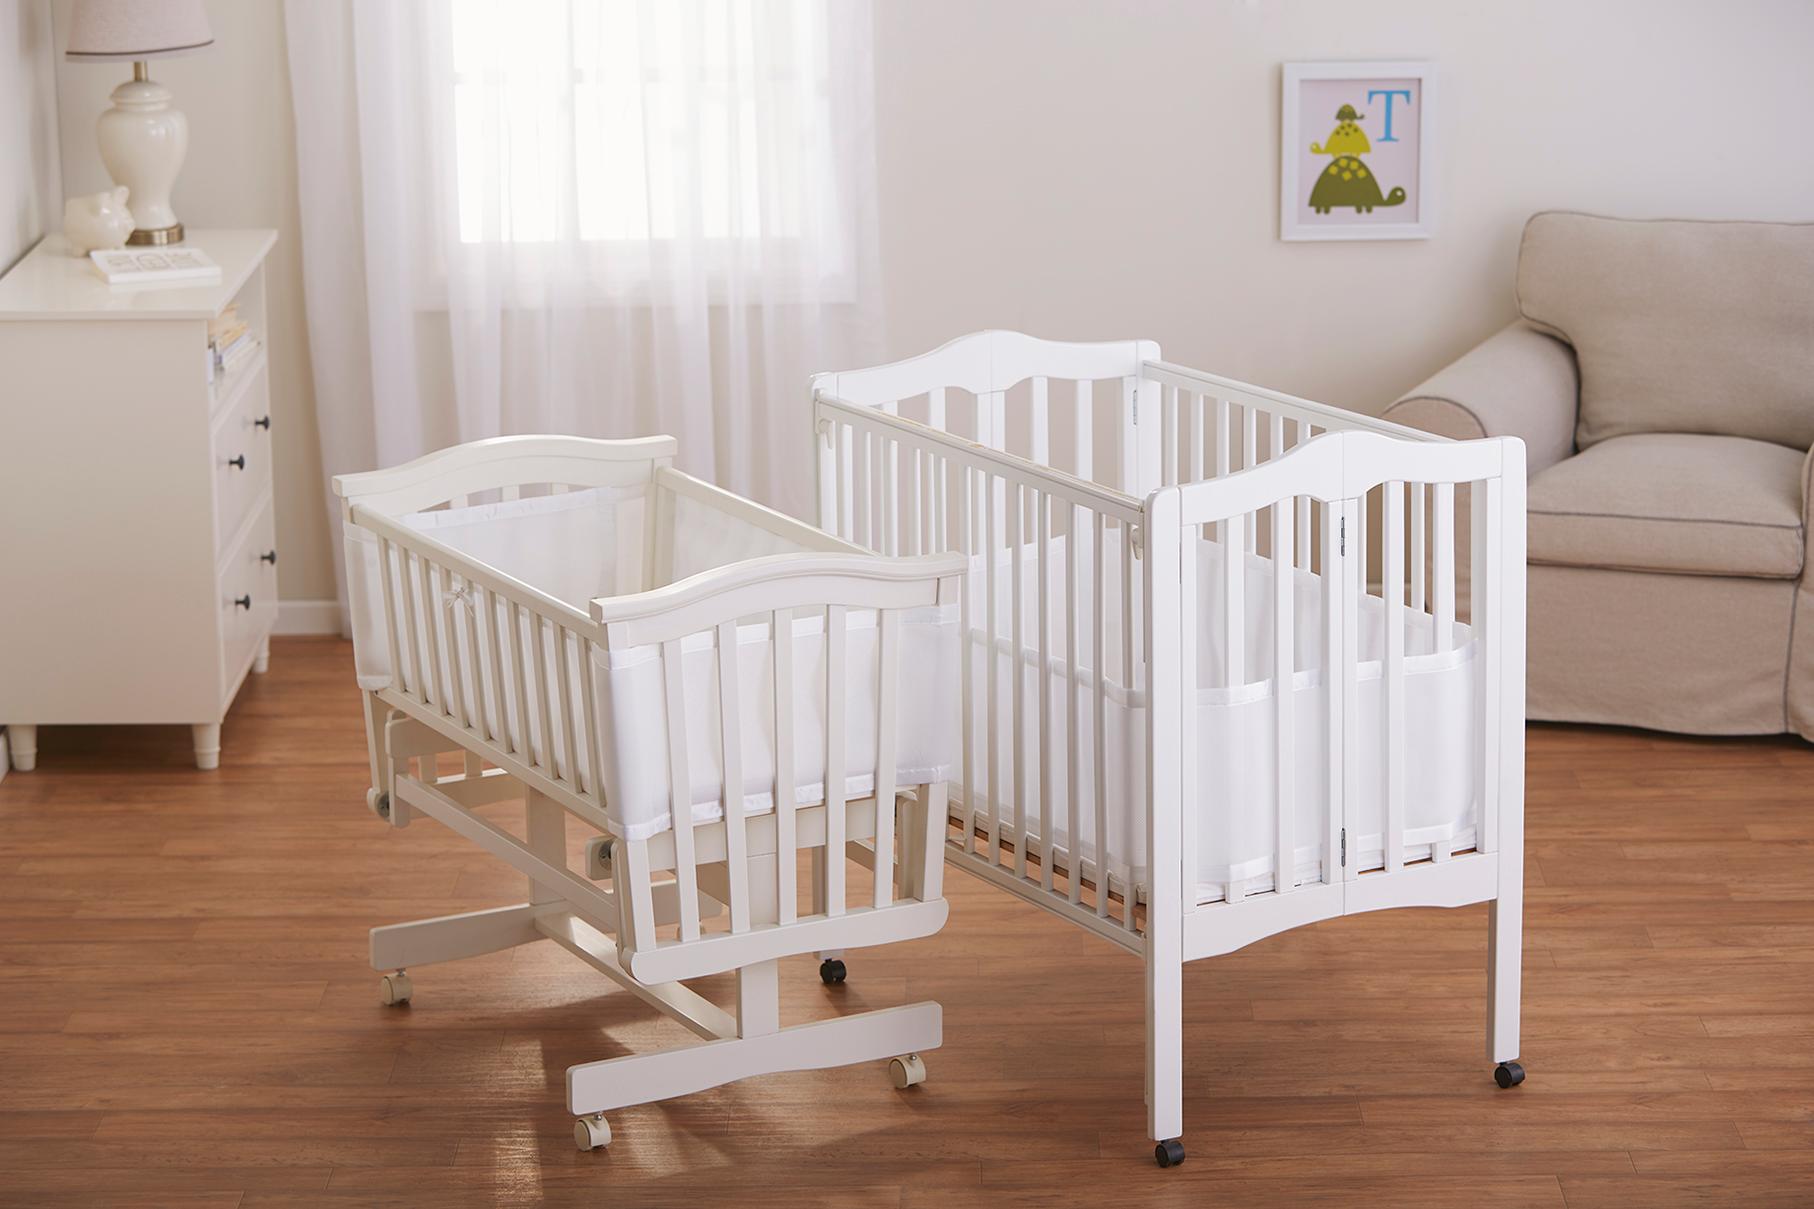 Portable Folding Baby Crib Review: A Convenient Solution for Parents